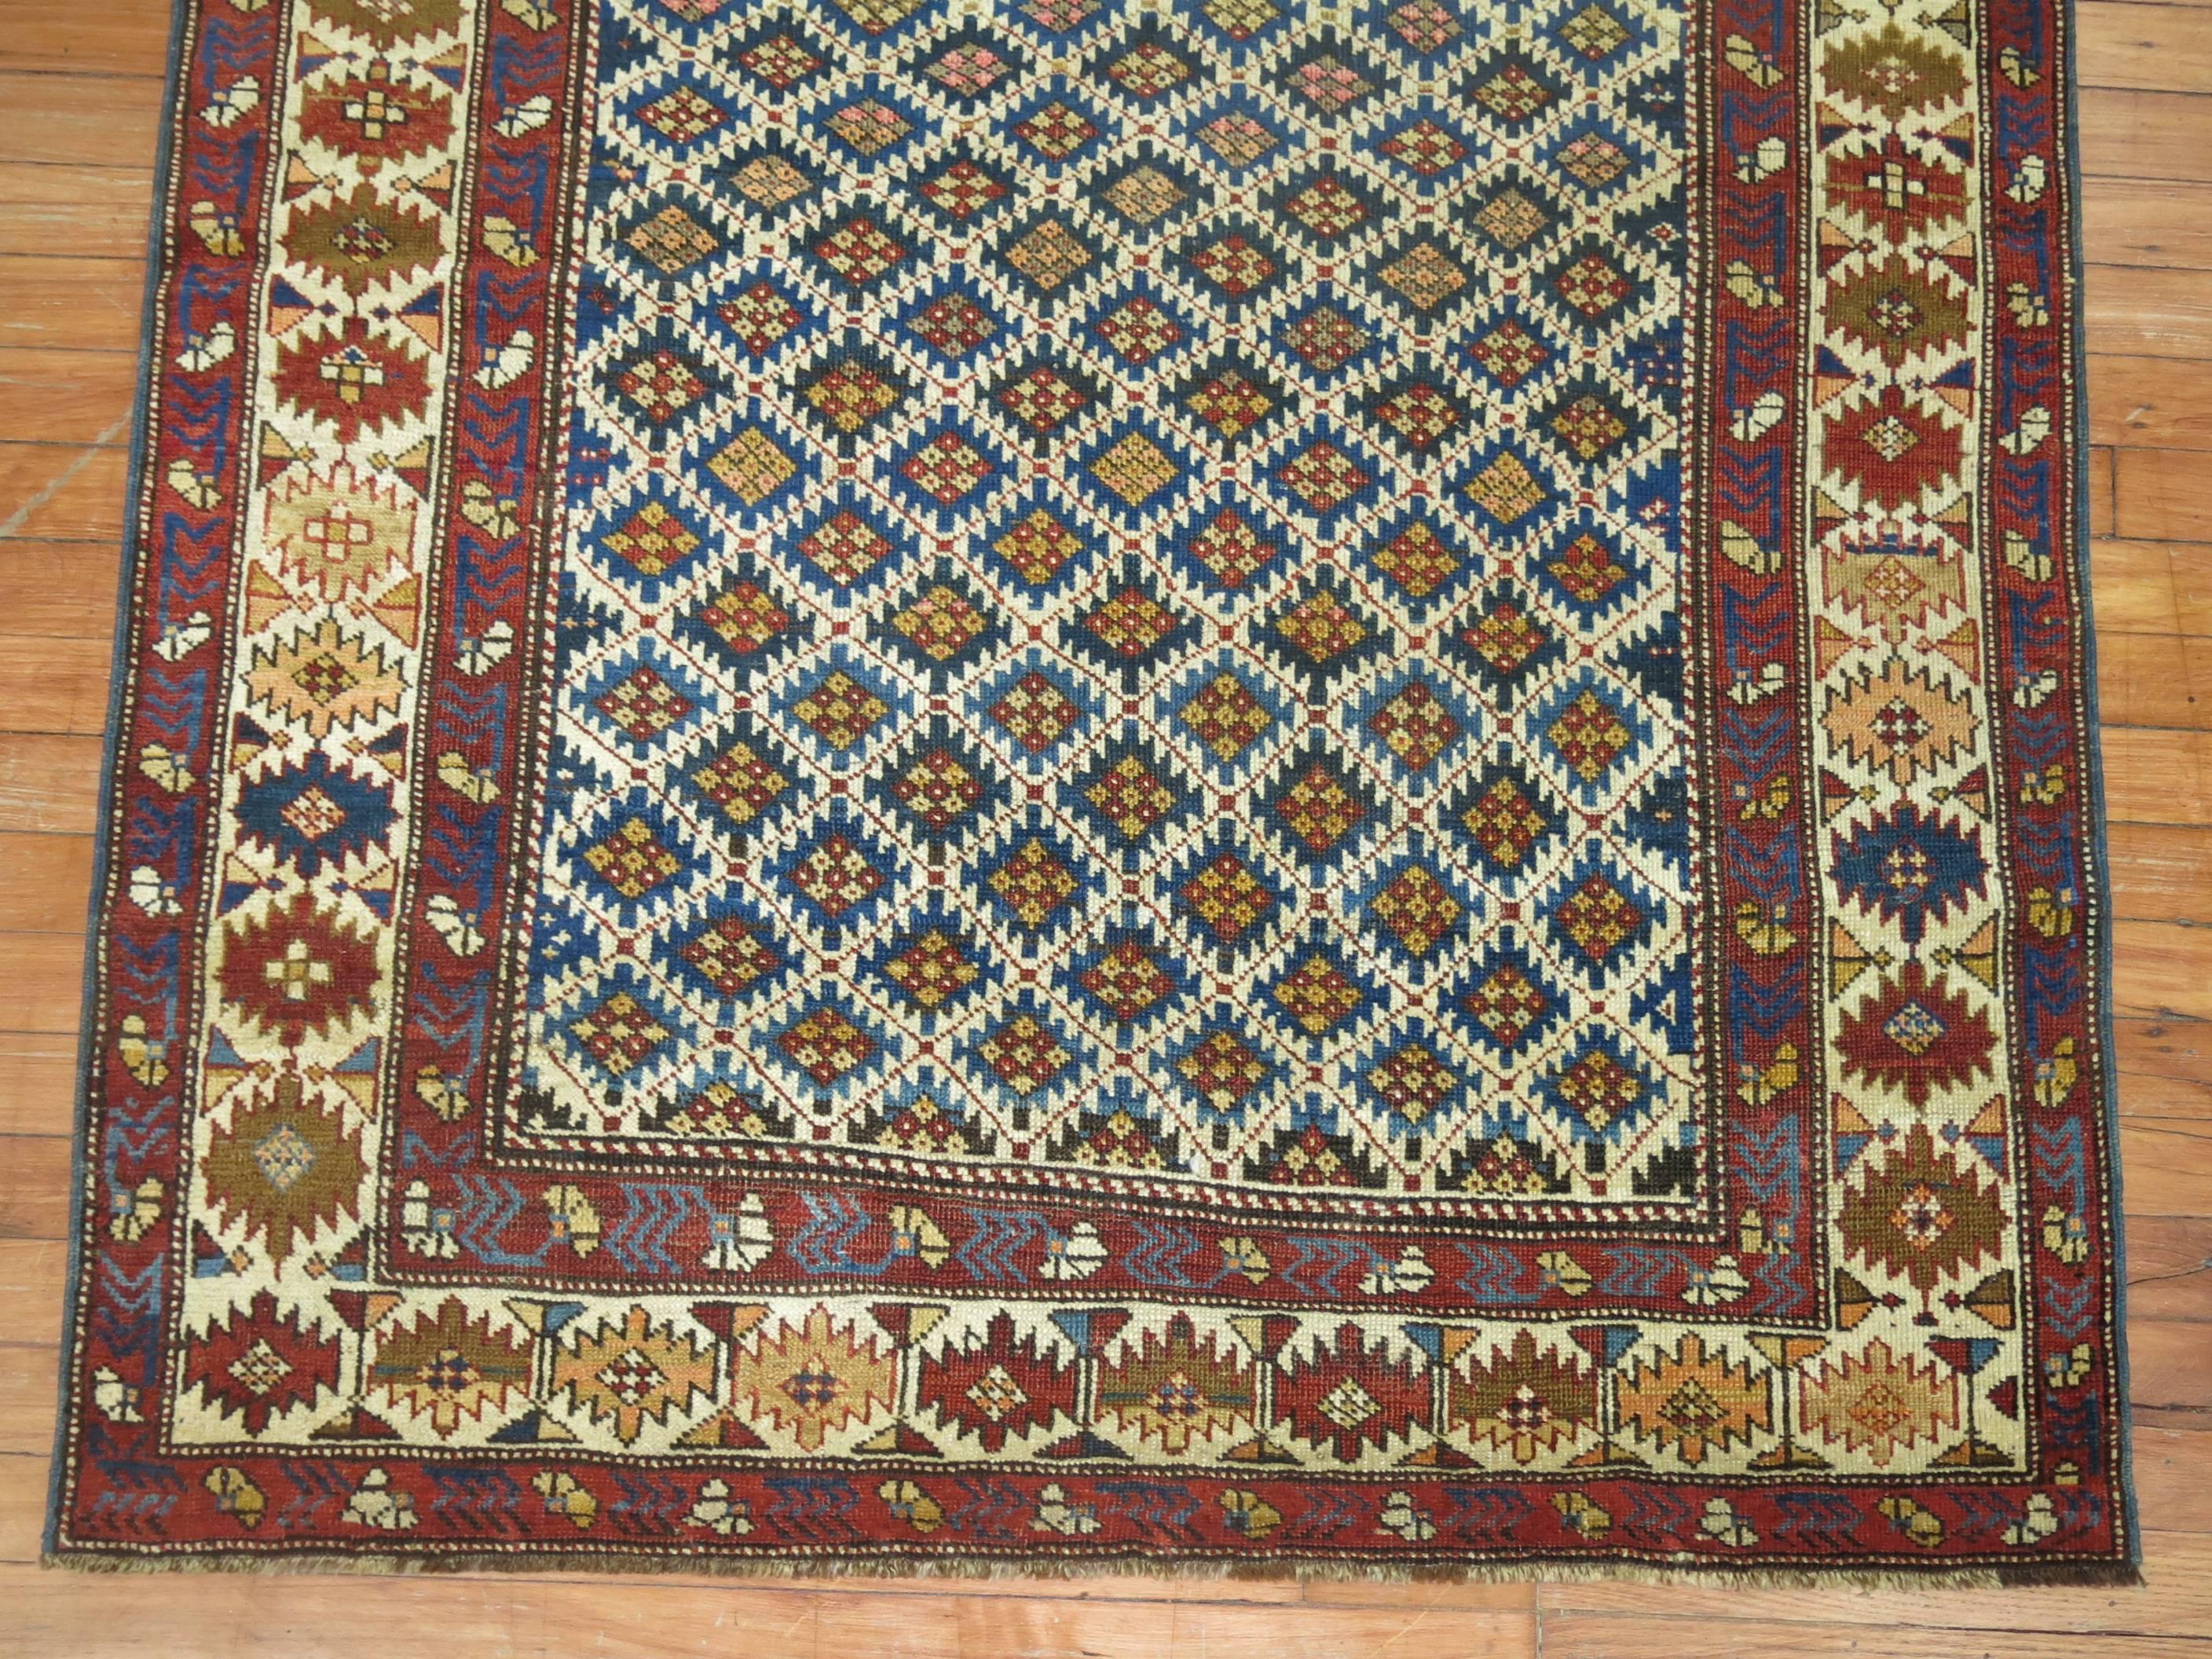 An early 20th century decorative Caucasian rug.